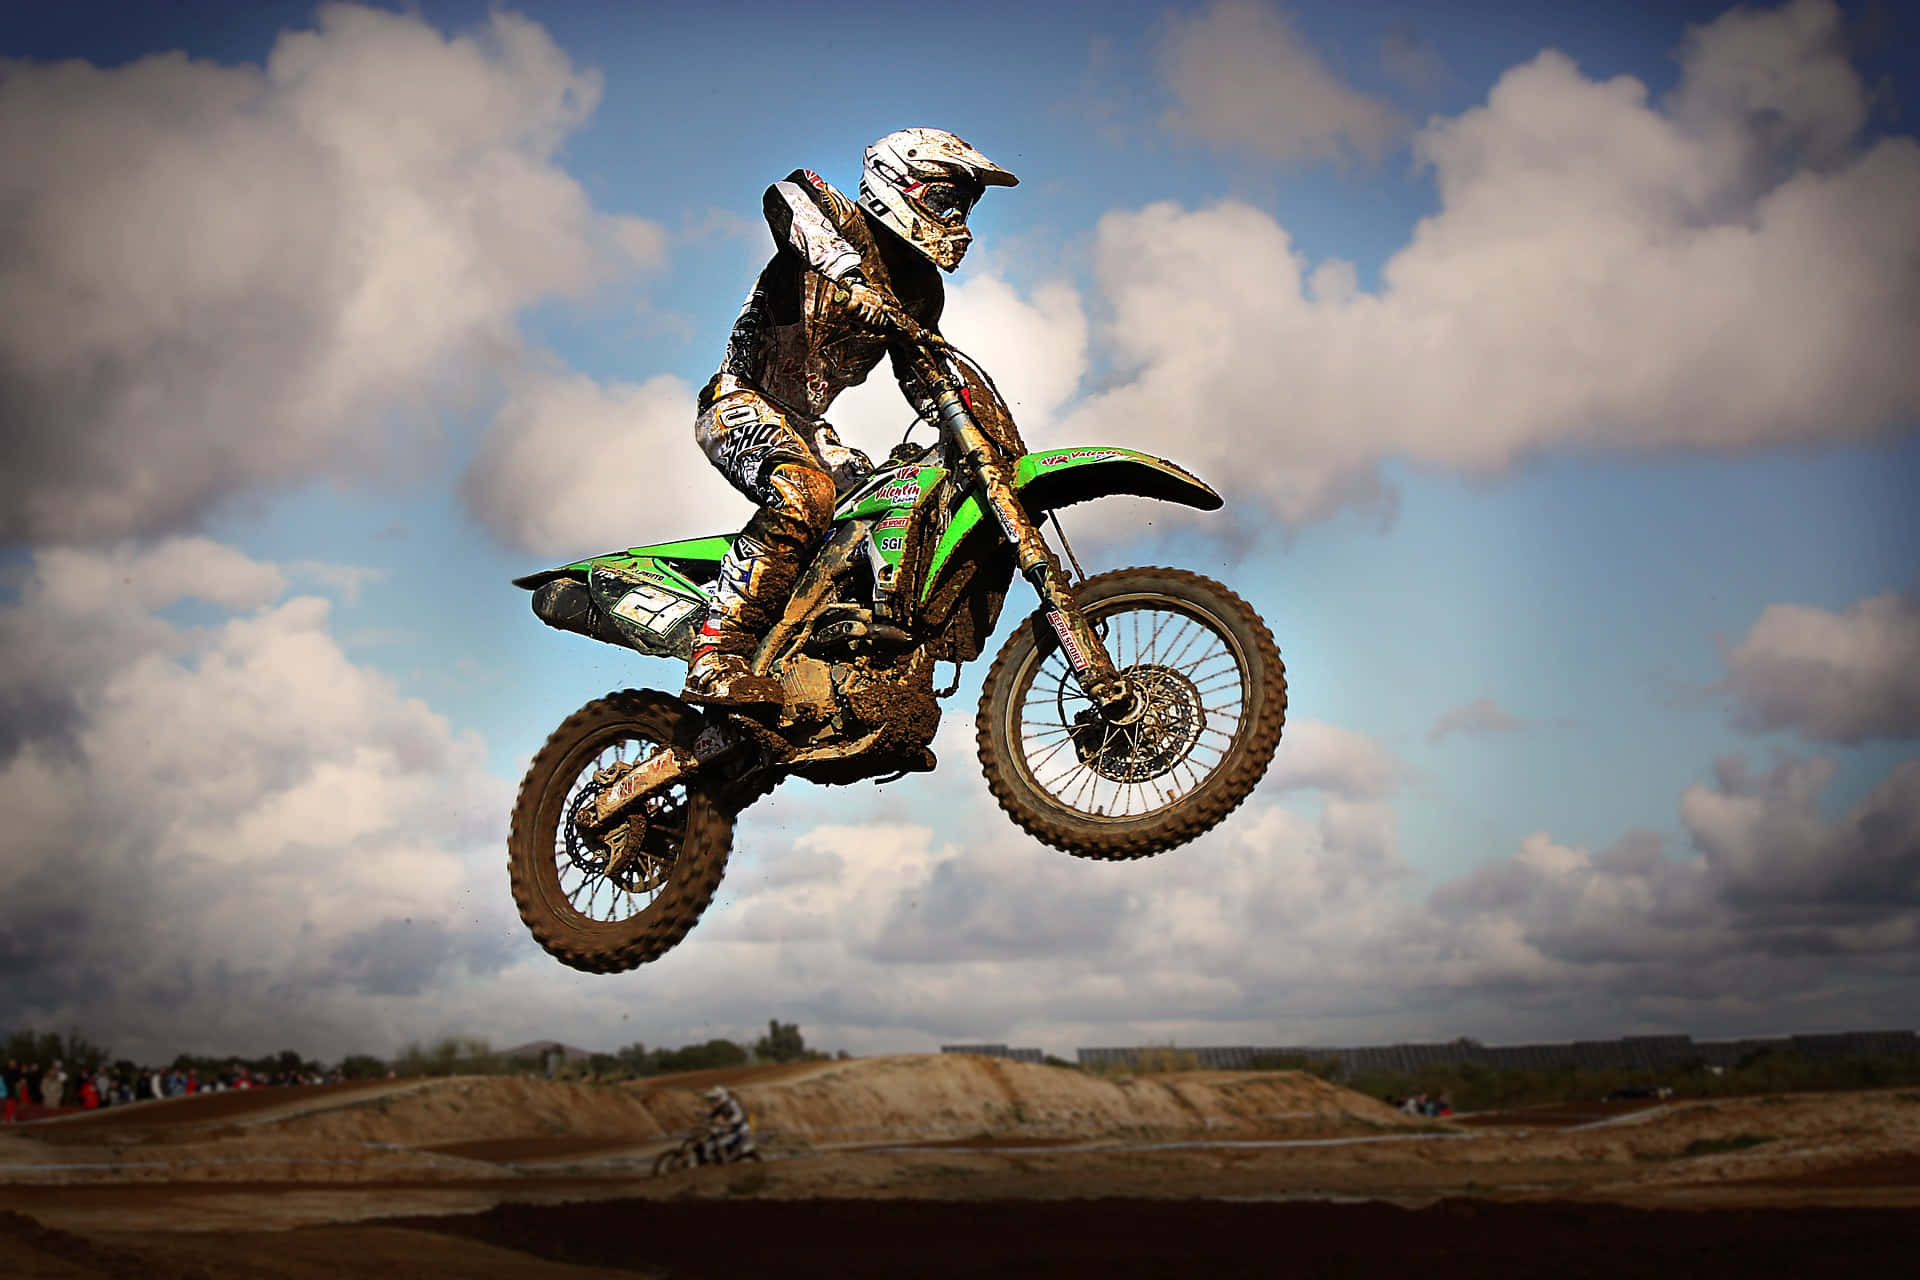 Professional Dirt Bike Rider Jumping High in a Scenic Location